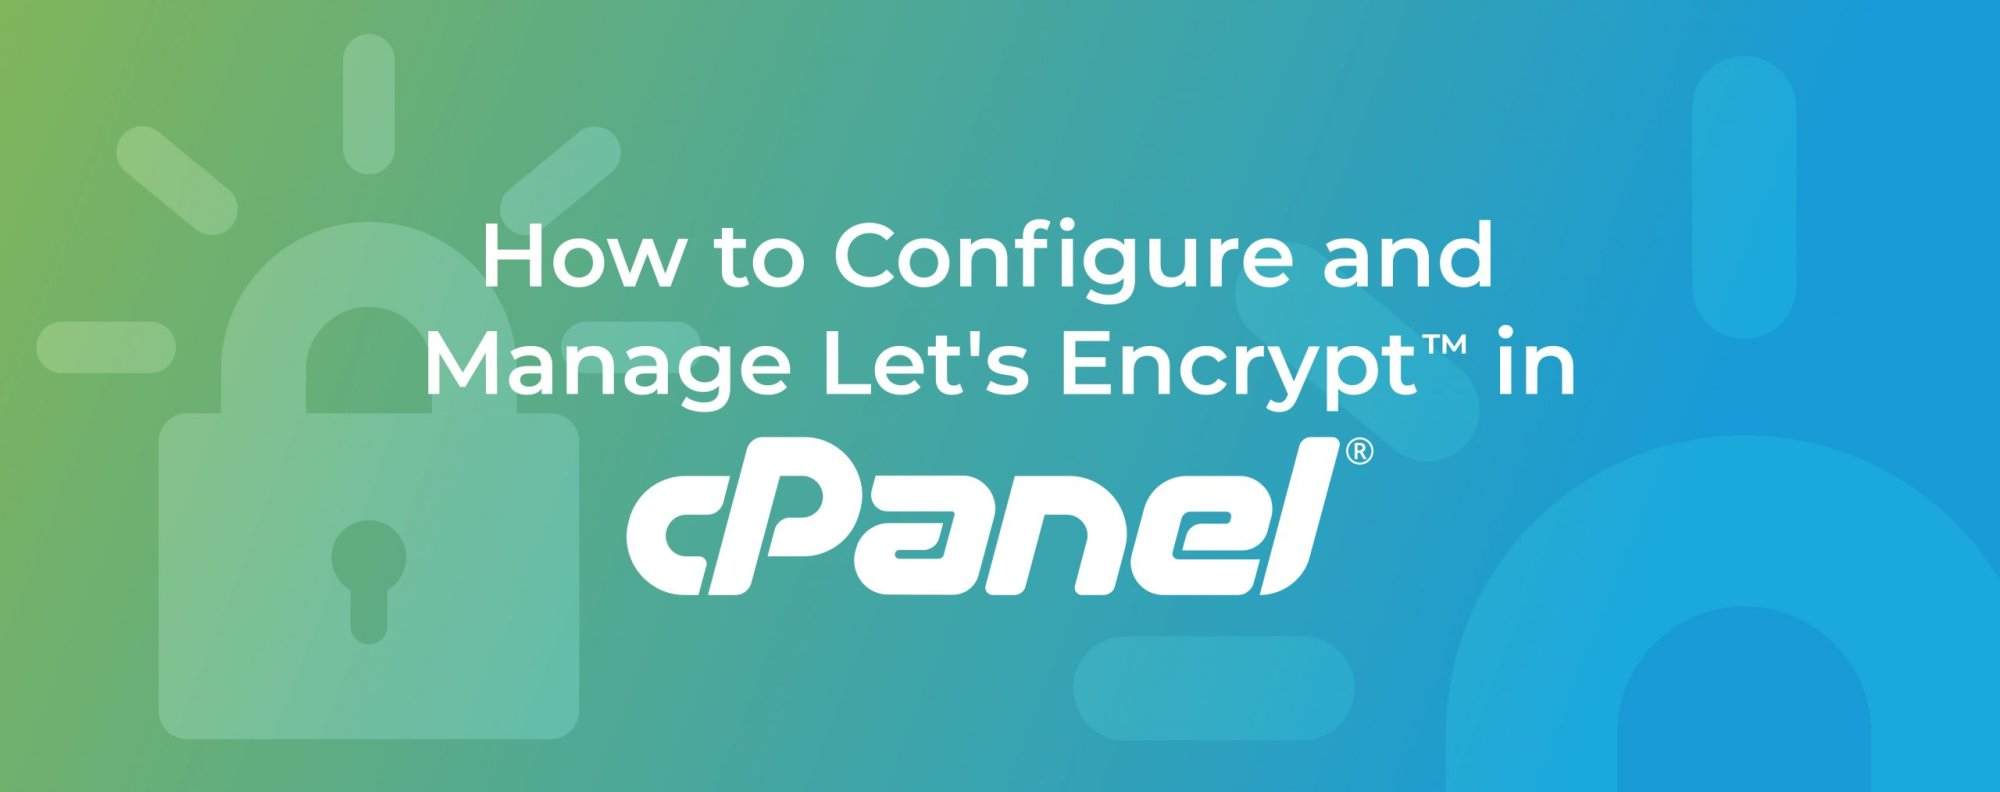 How to Install an SSL Certificate Using Let’s Encrypt Inside cPanel